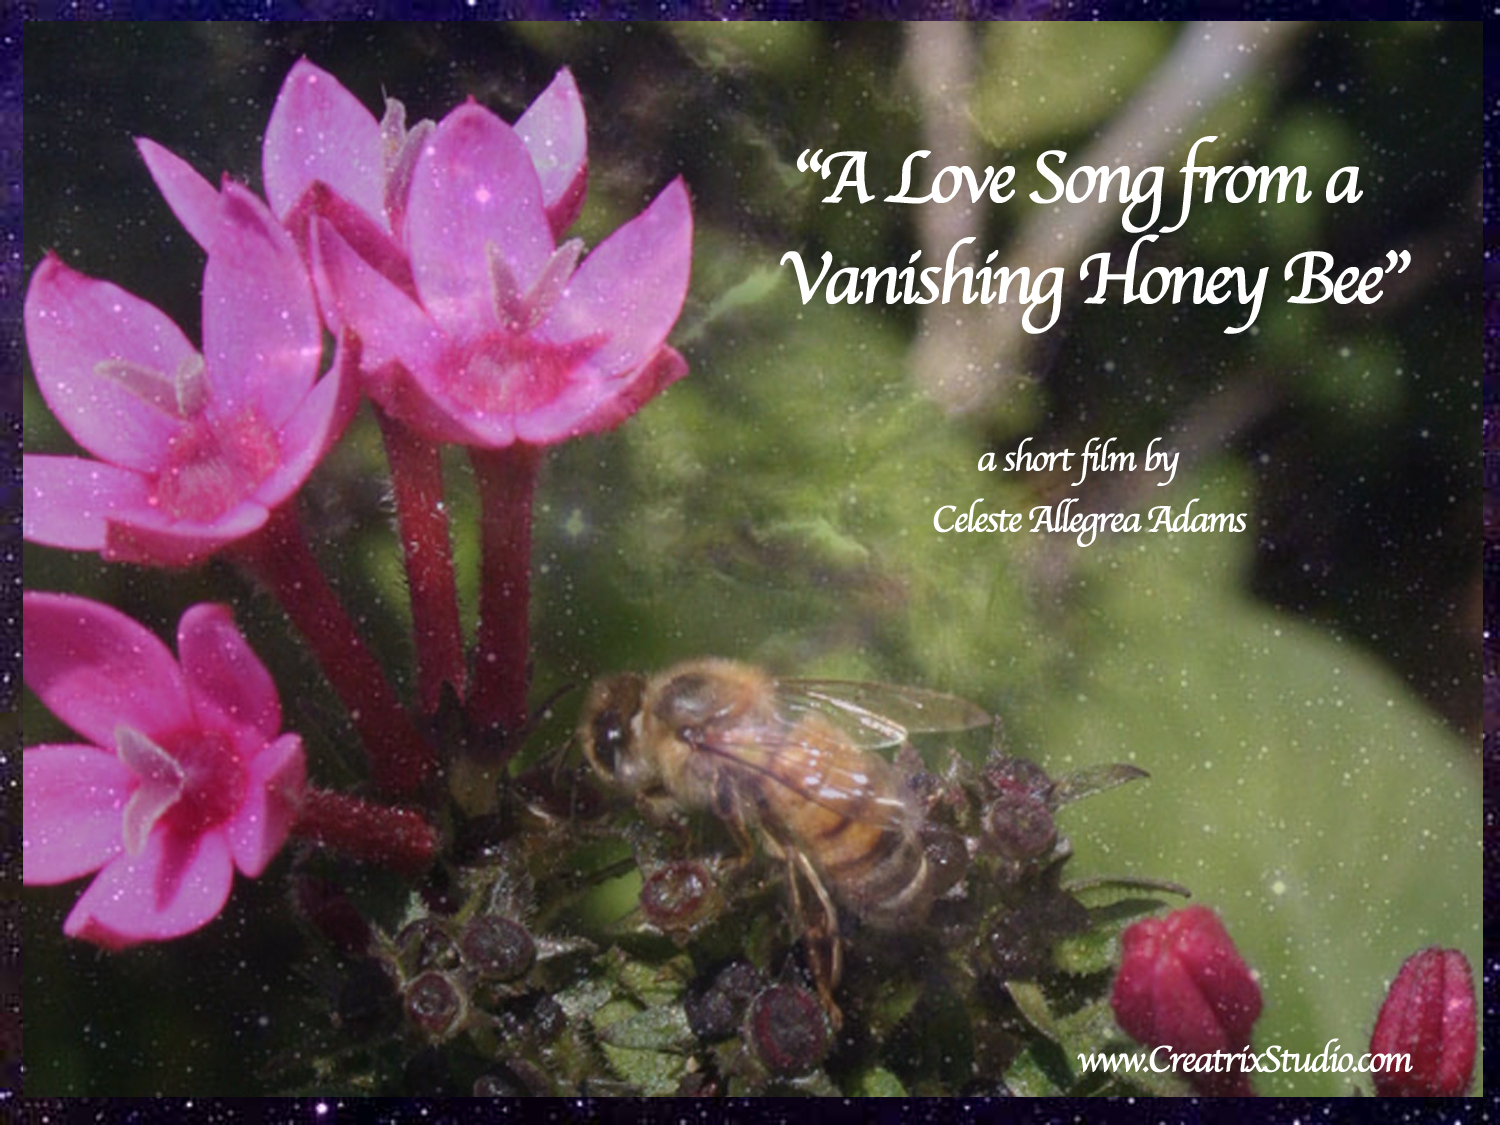 A Love Song from a Vanishing Honeybee